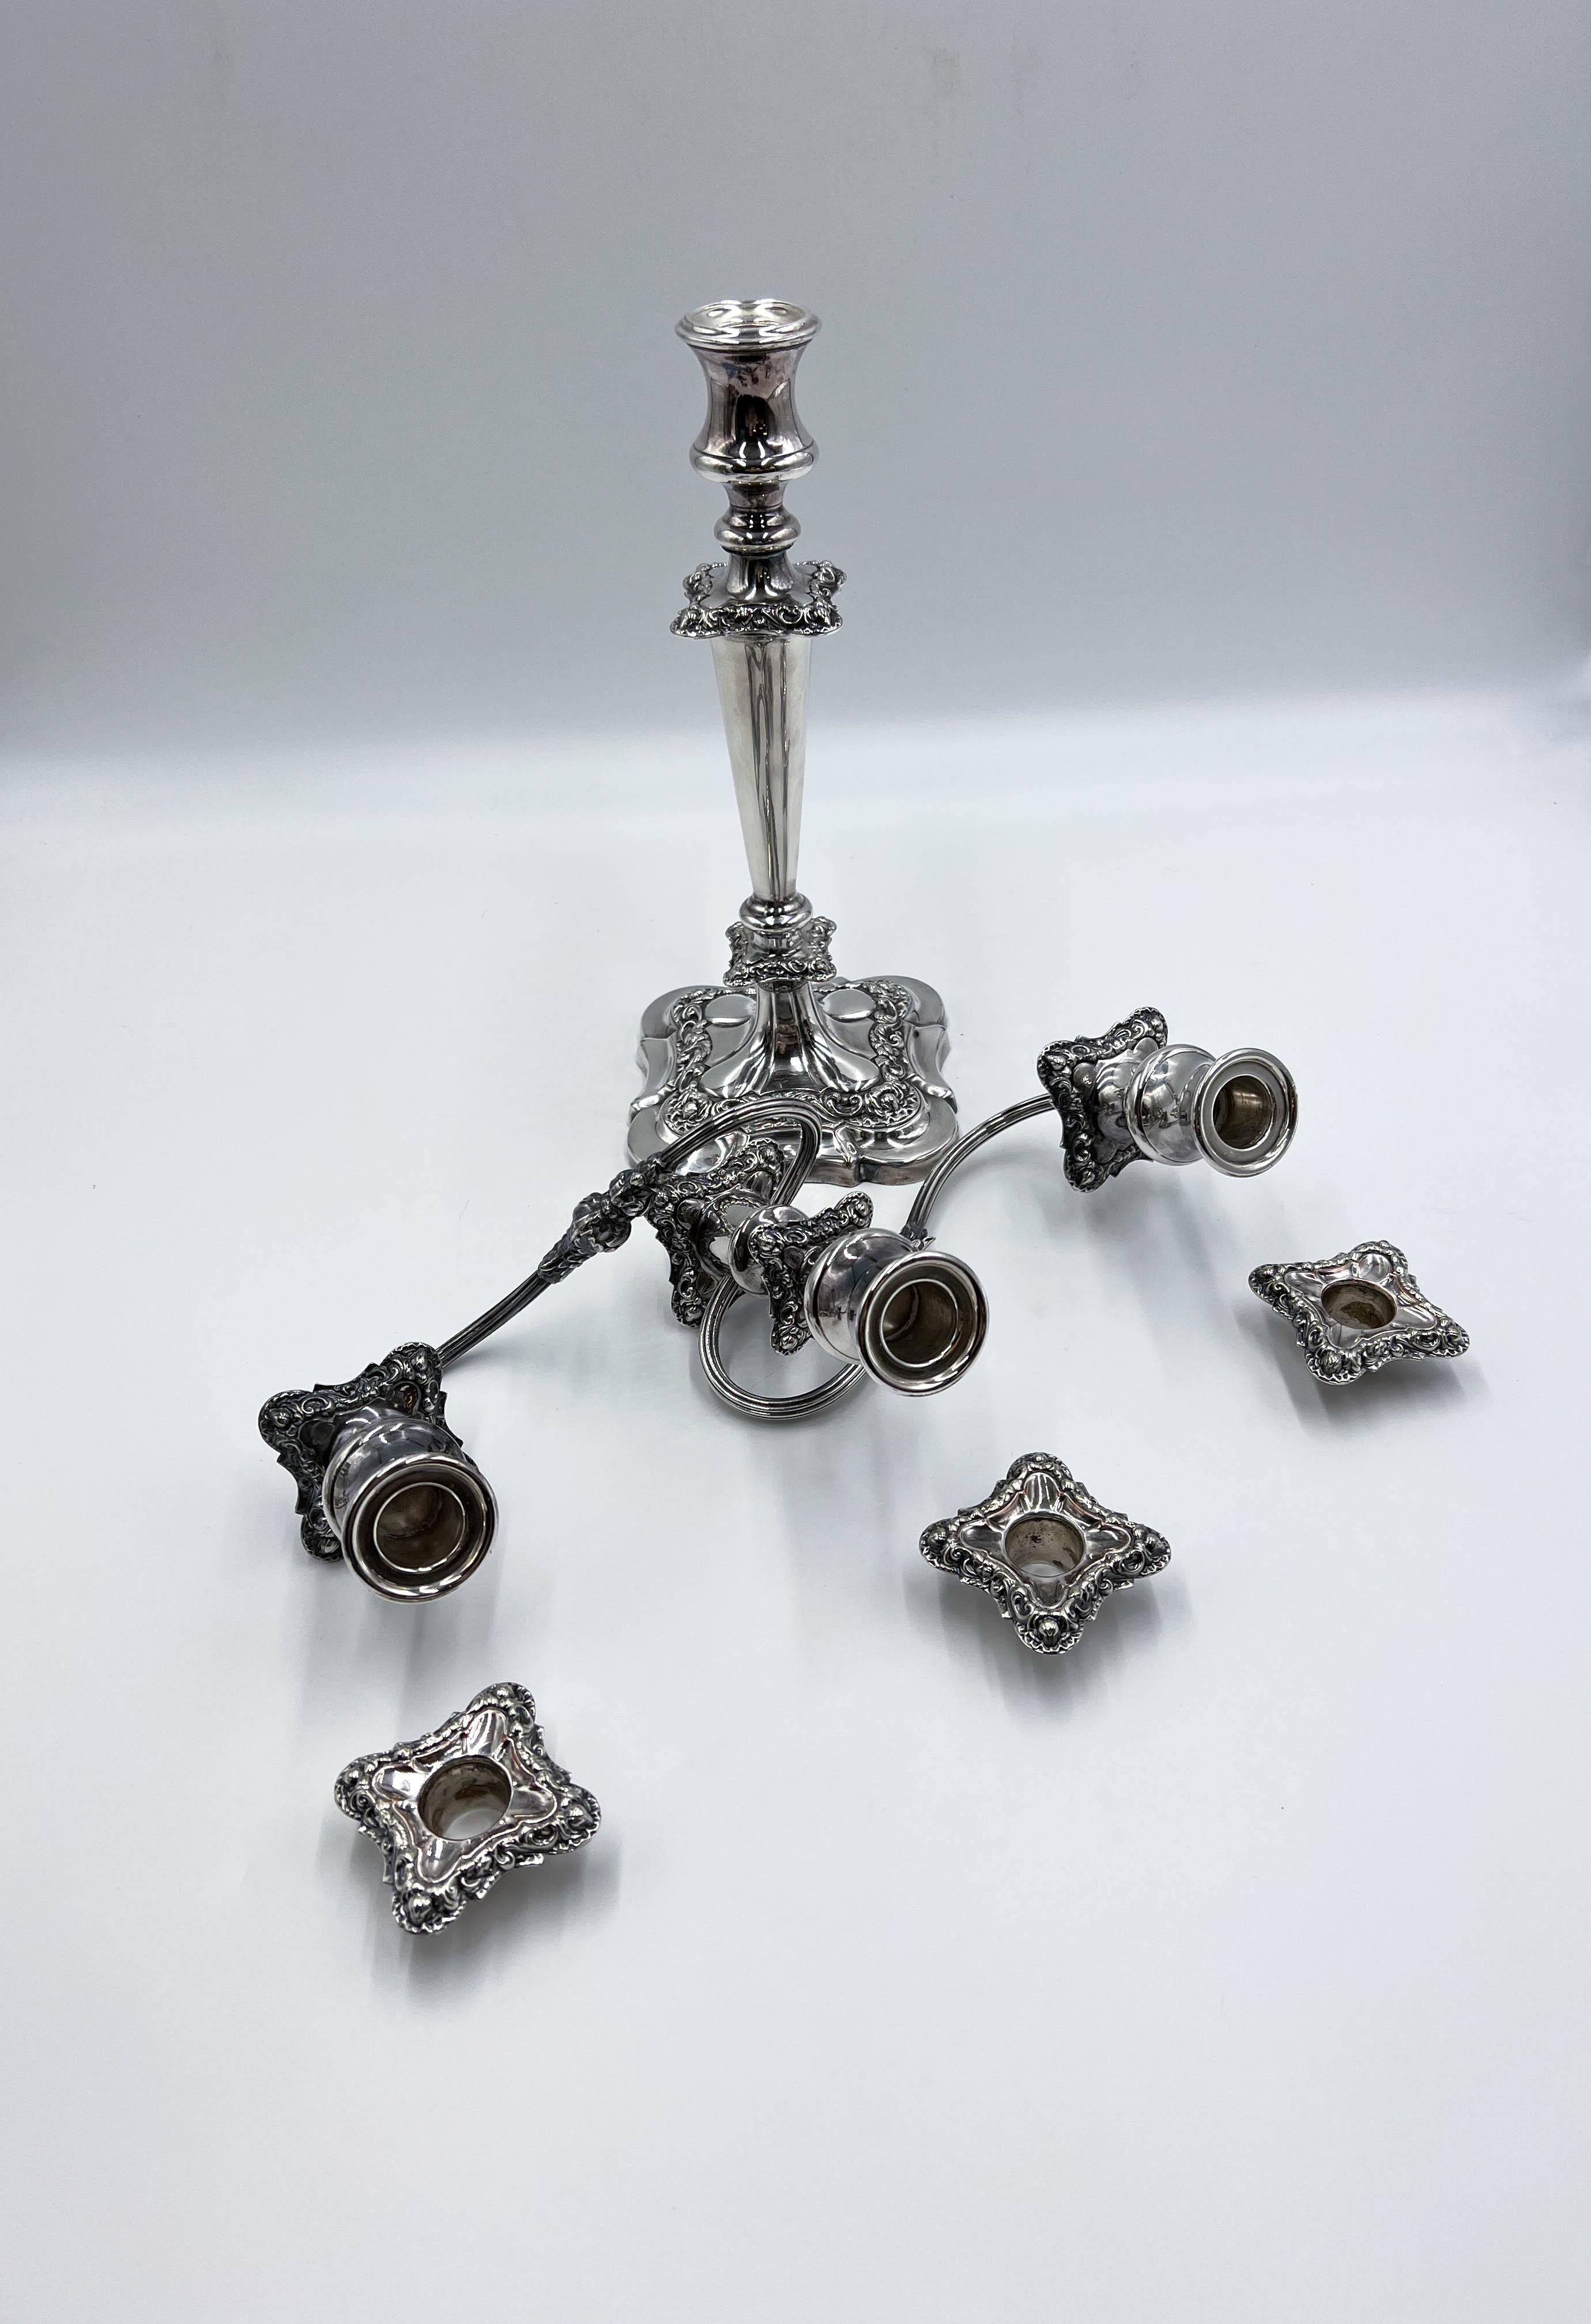 Pair of 1920s William Suckling Ltd English Silver Plate Candelabras/Candlesticks For Sale 11